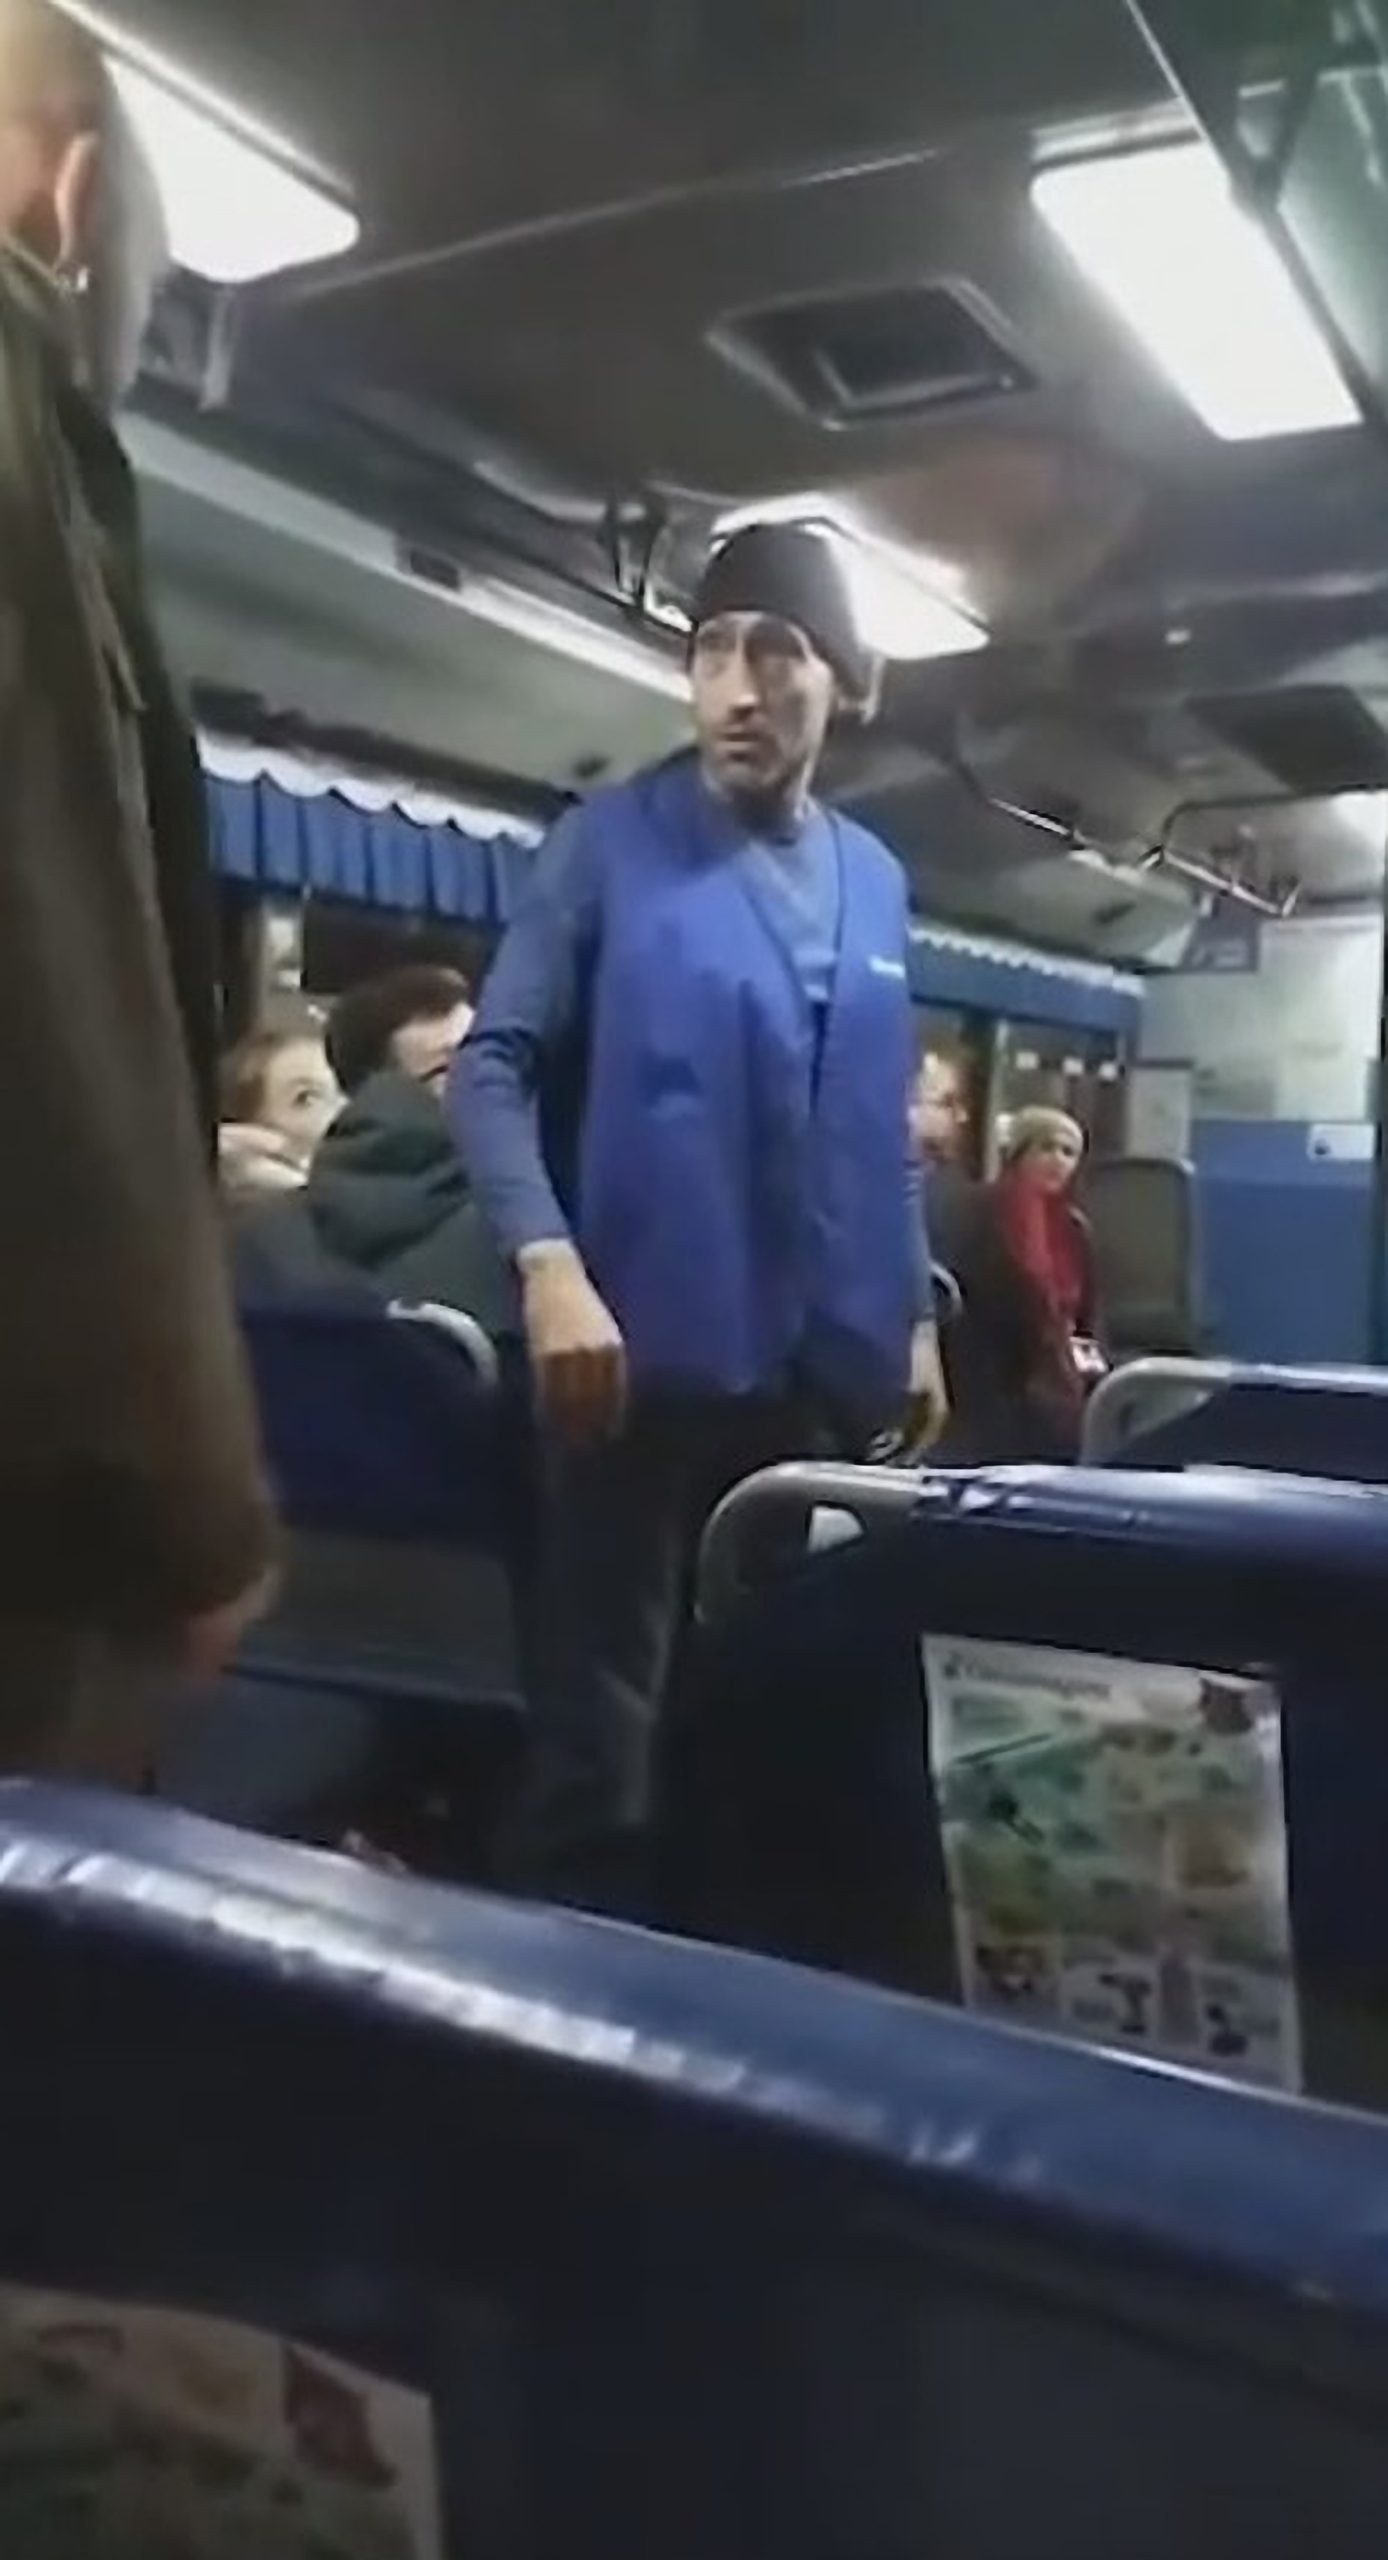 Read more about the article Moment Russian Bus Driver Beats Burly Passenger Who Tried To Headbutt Him